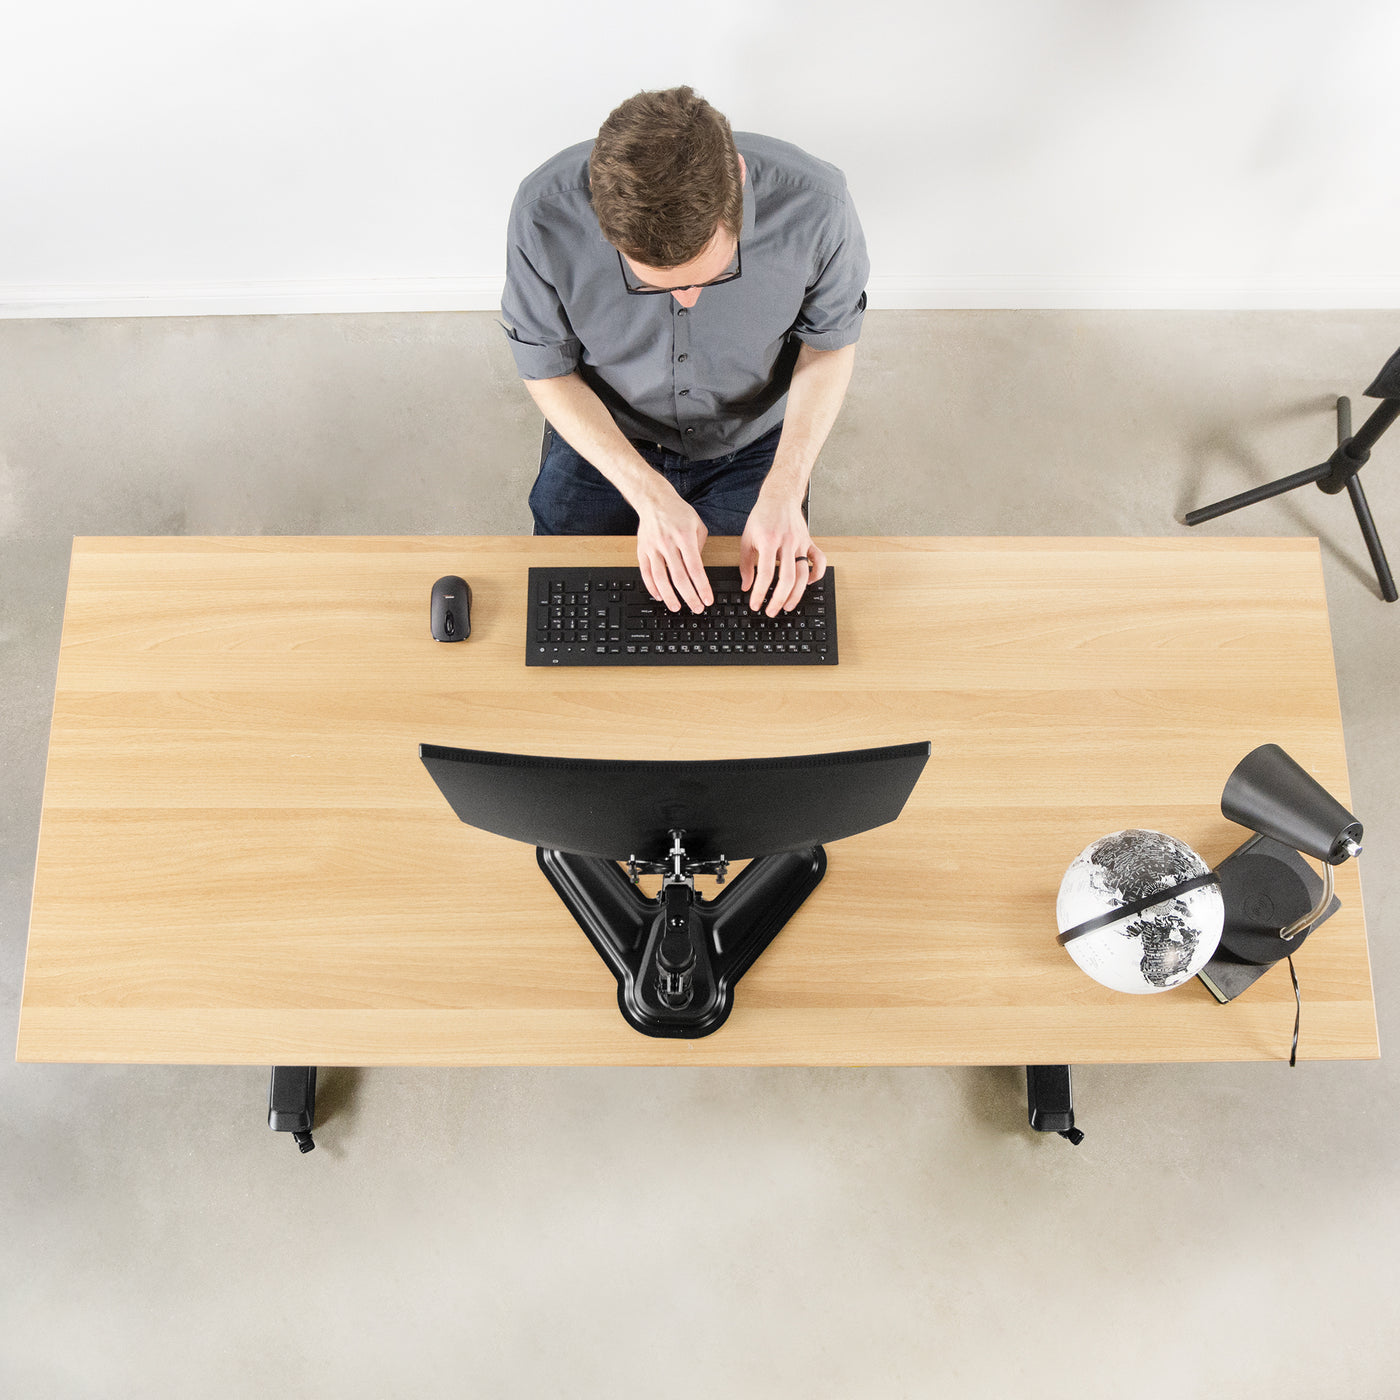 A person working at an ergonomic desk with a mounted Viotek monitor screen